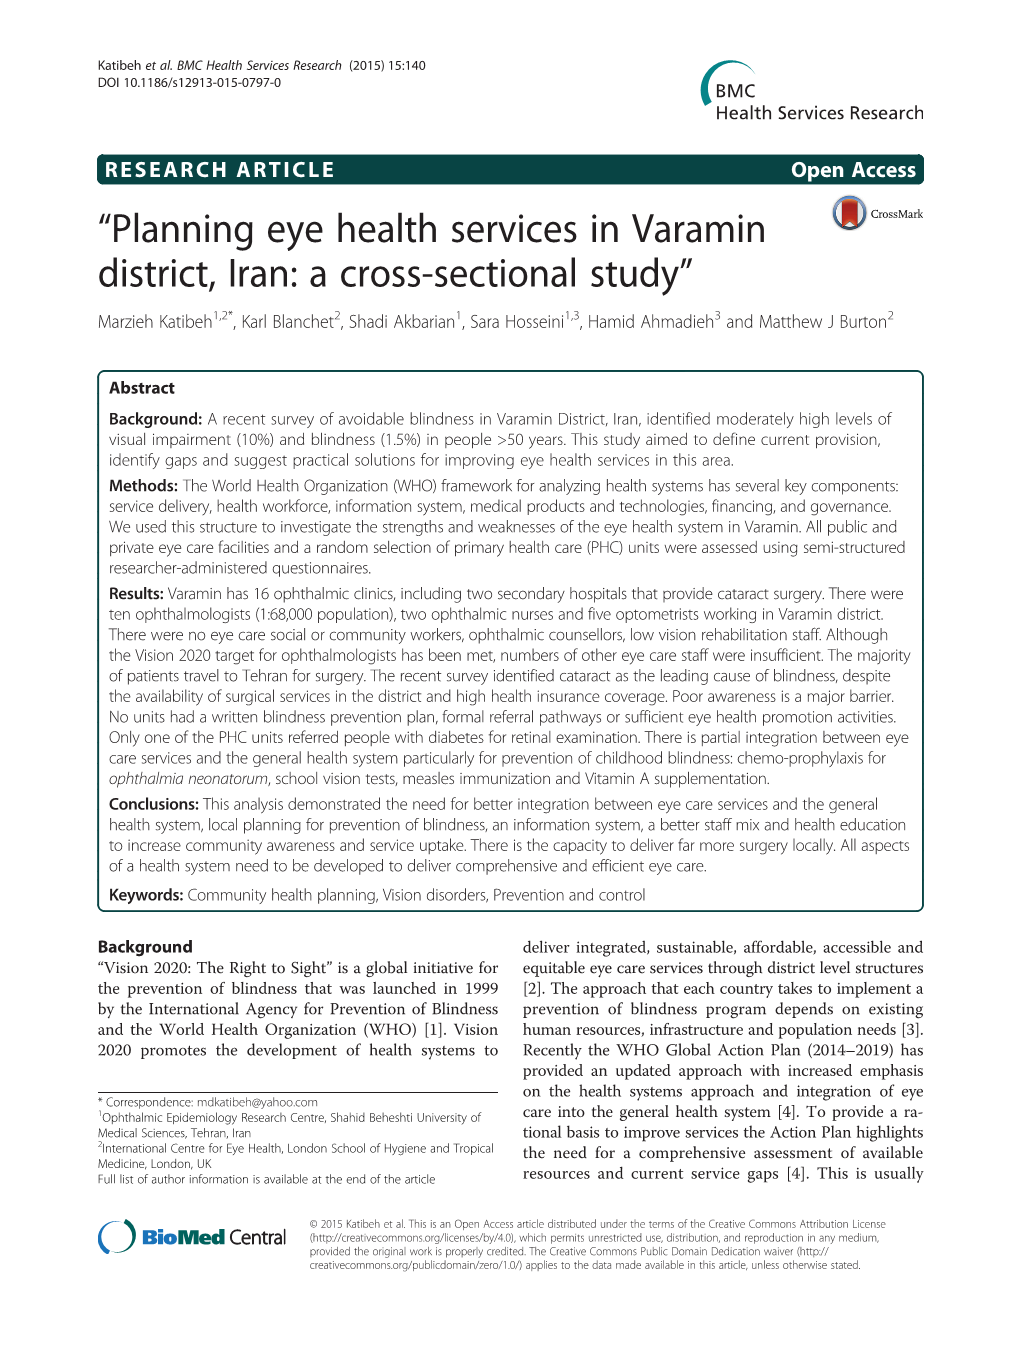 “Planning Eye Health Services in Varamin District, Iran: a Cross